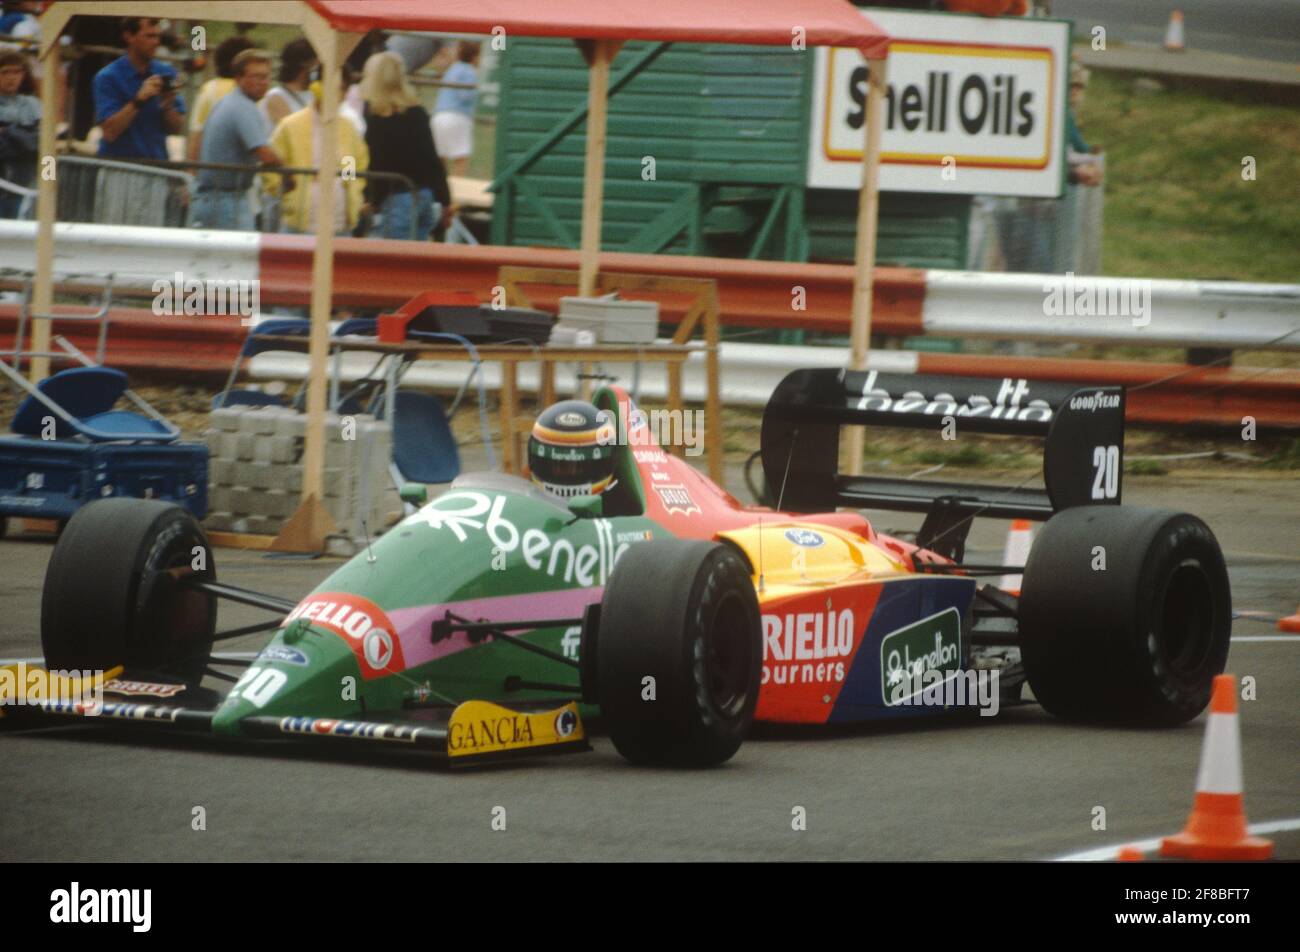 Thierry Boutsen brings his Benetton B187 into the pits during qualifying  for the 1987 British Grand Prix, Silverstone Stock Photo - Alamy